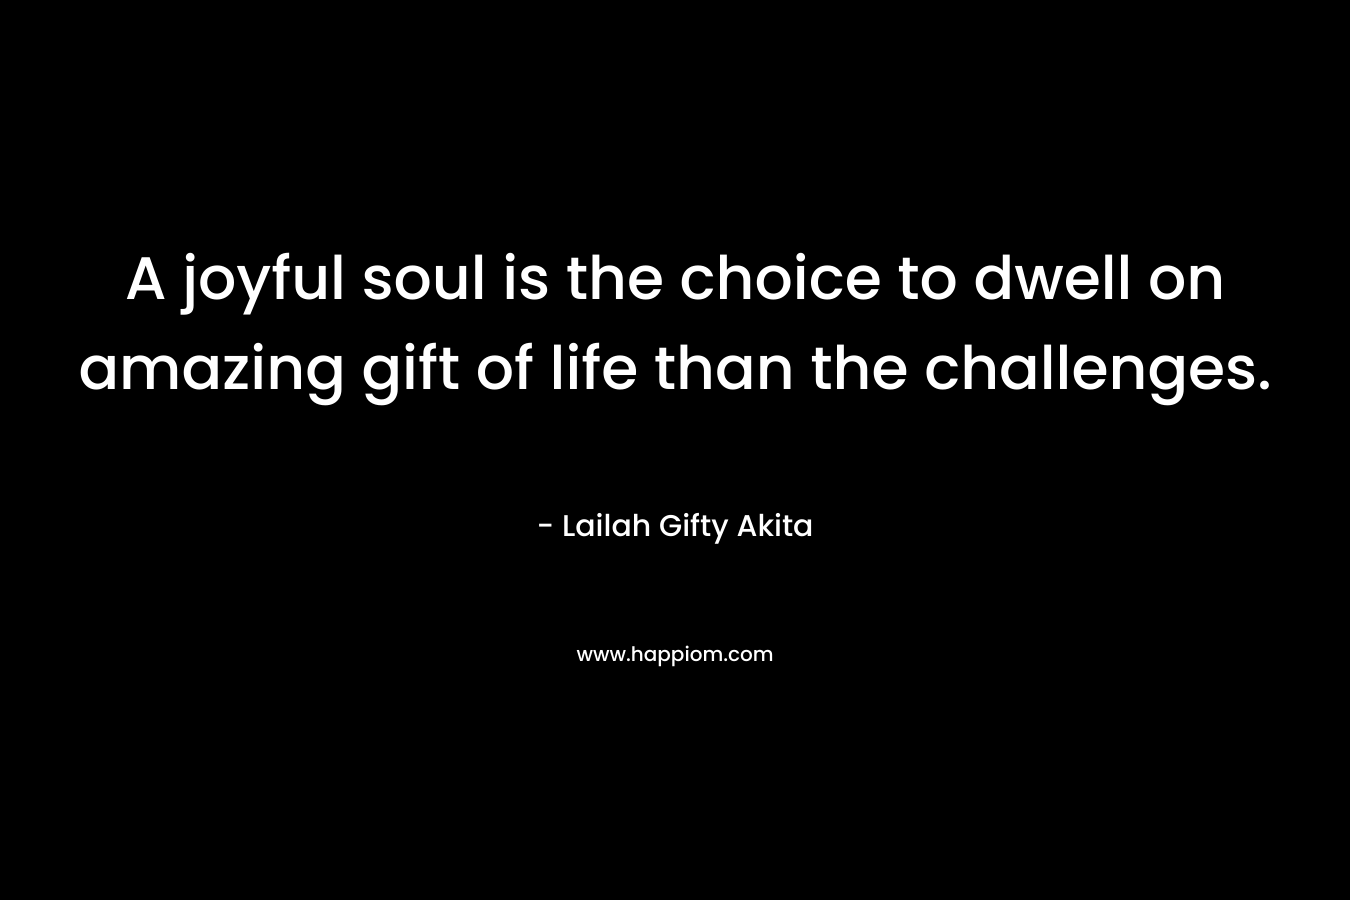 A joyful soul is the choice to dwell on amazing gift of life than the challenges.